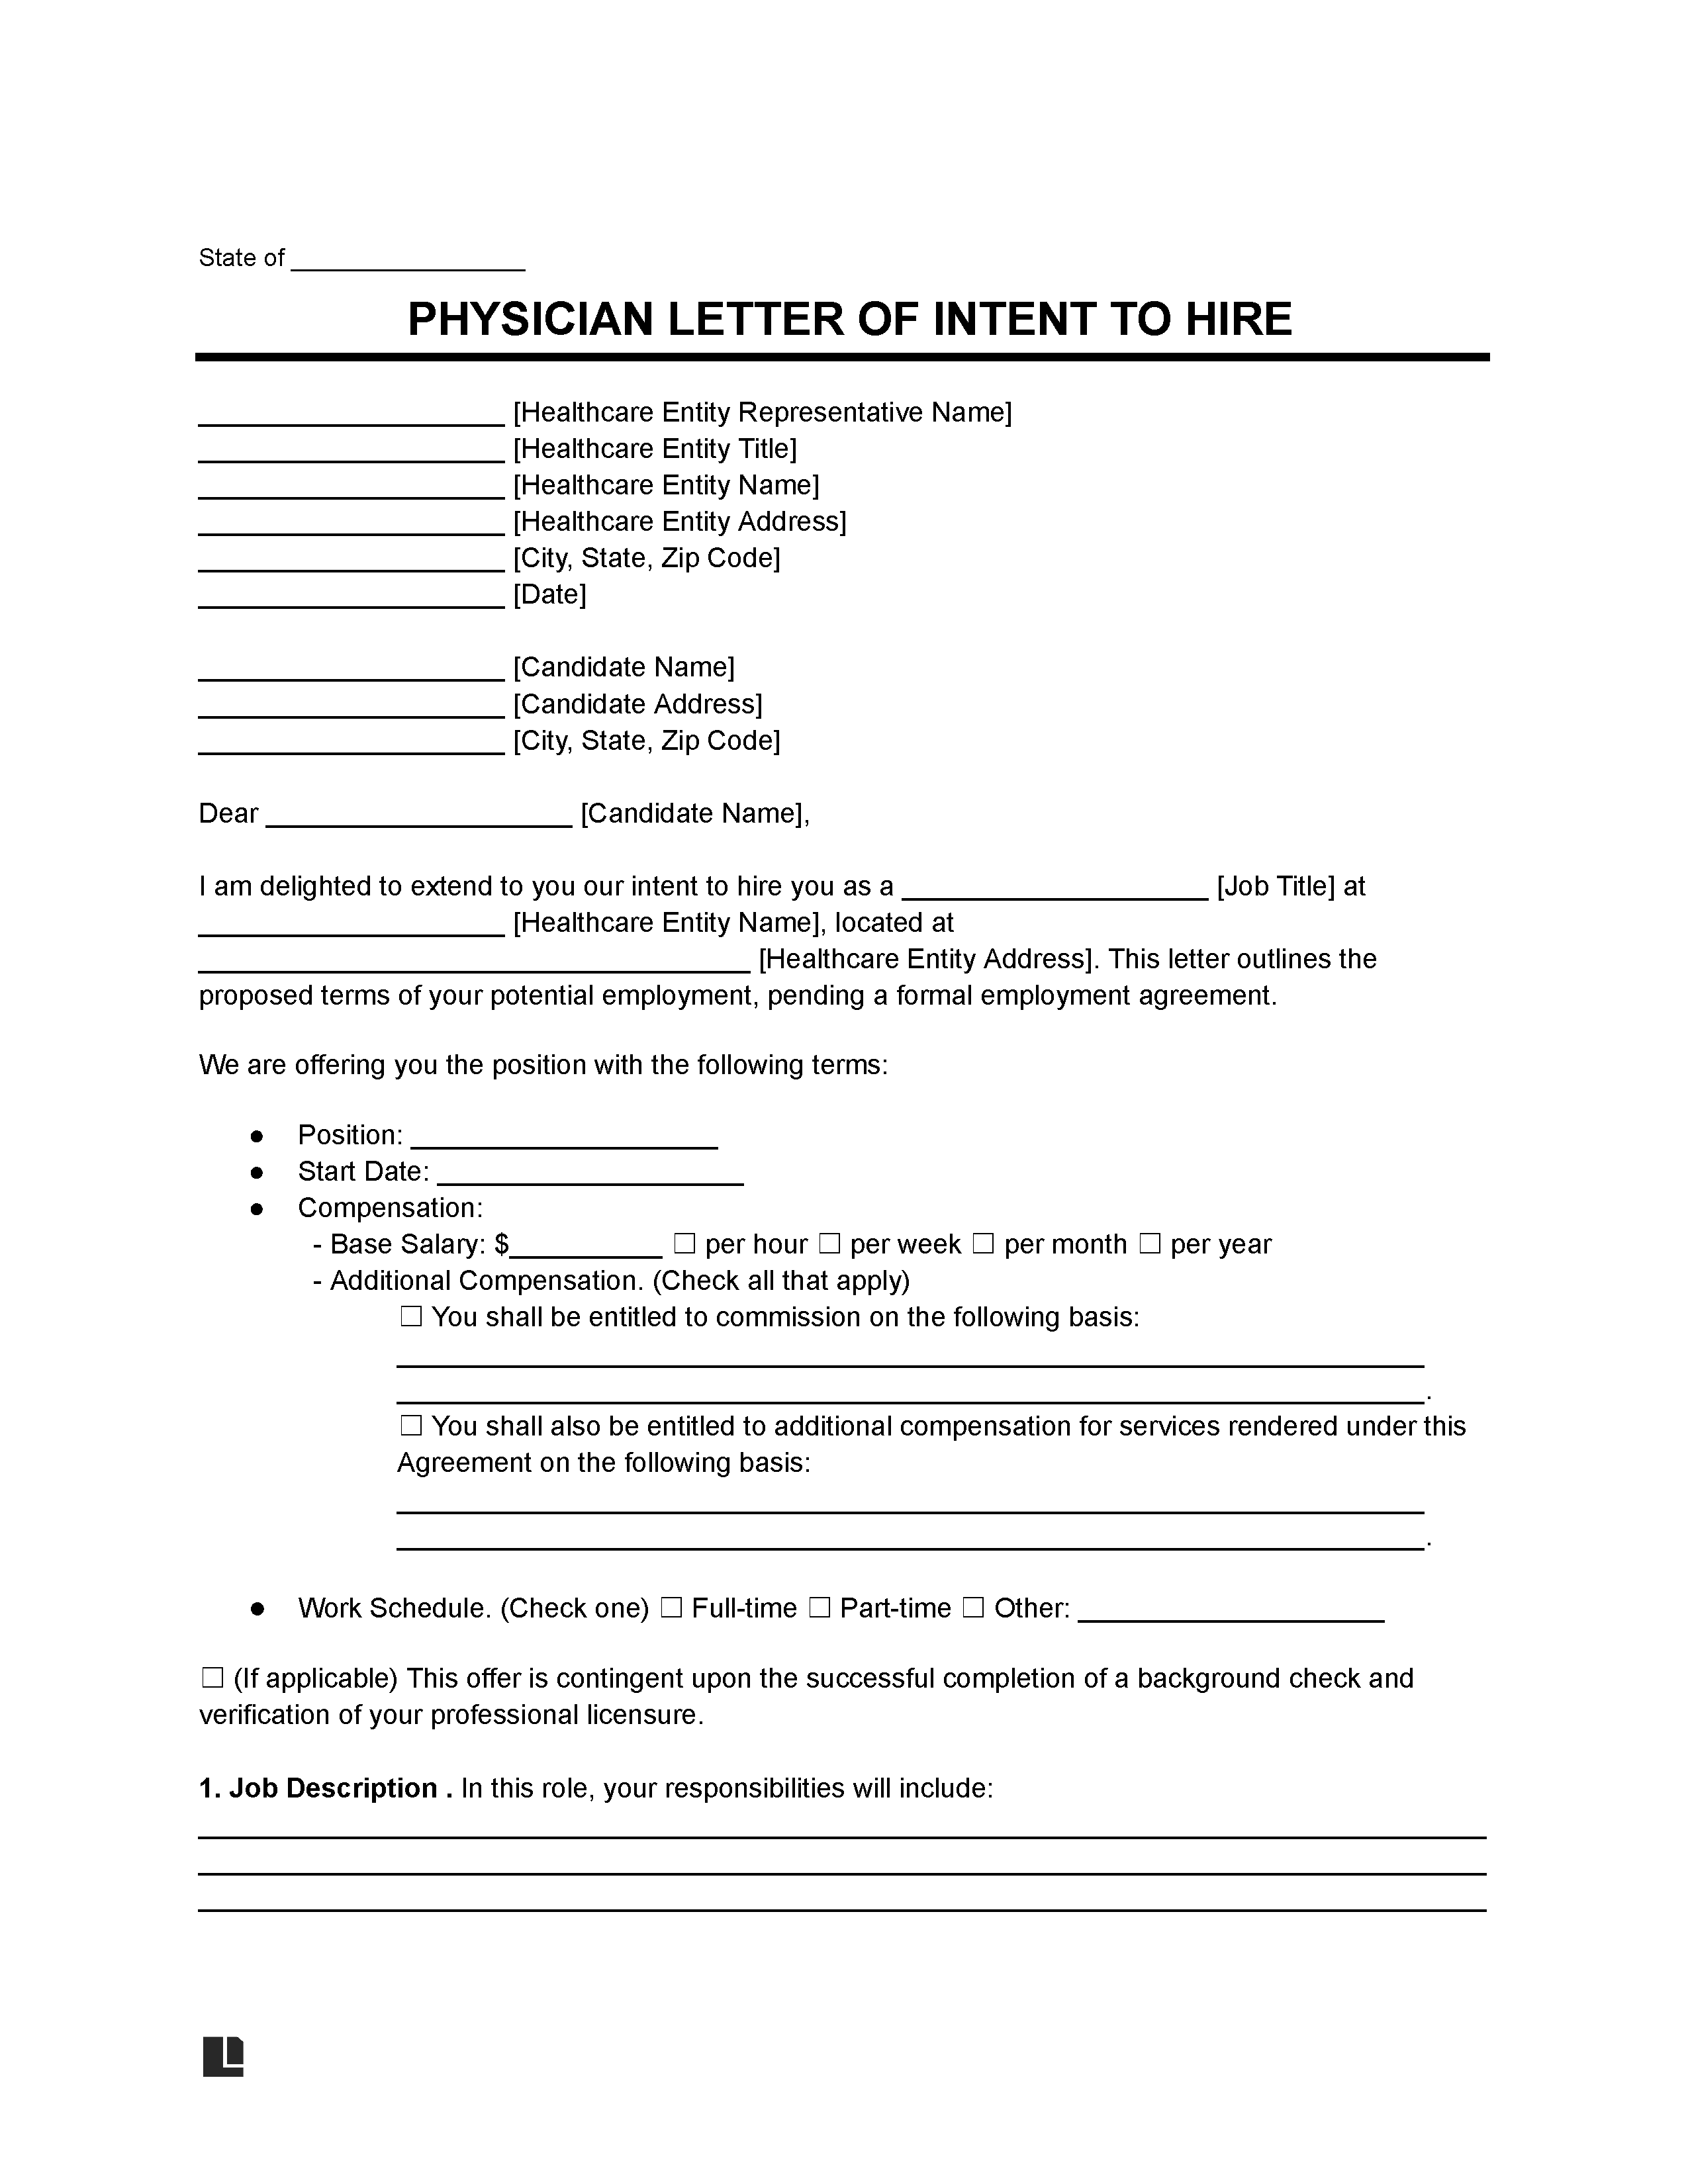 Physician Letter of Intent